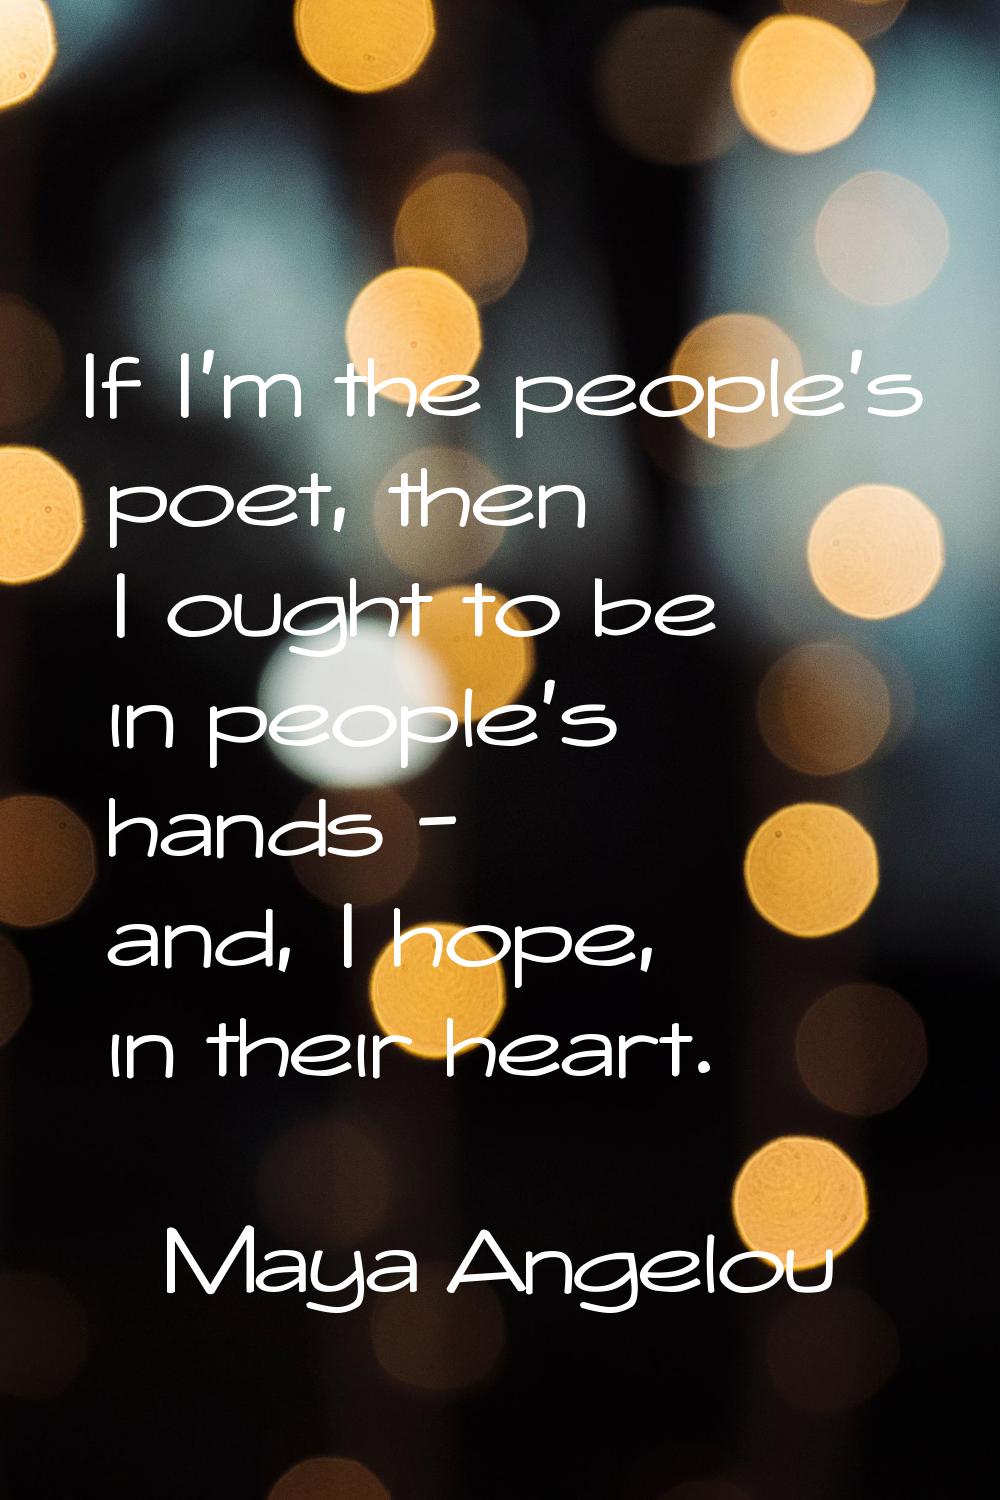 If I'm the people's poet, then I ought to be in people's hands - and, I hope, in their heart.